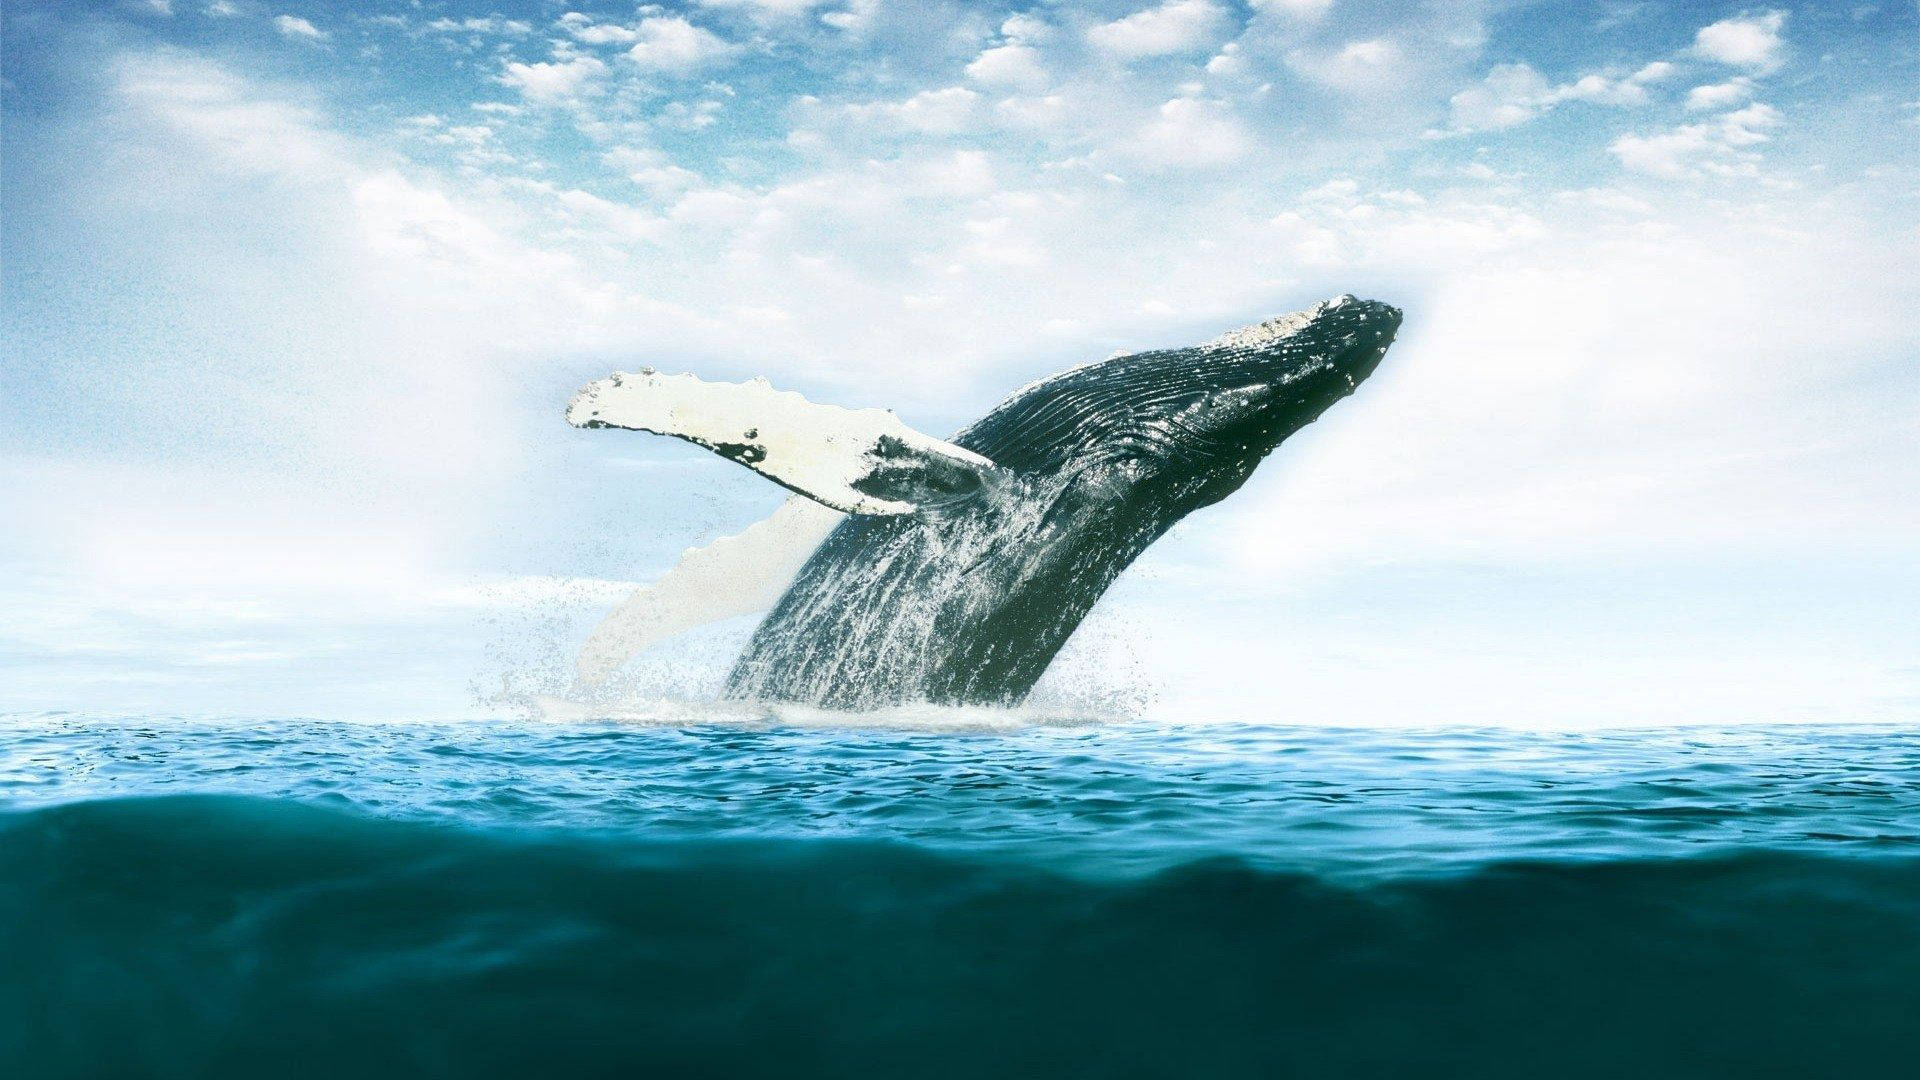 Caption: Majestic Whale Submerging From The Ocean Depths Background